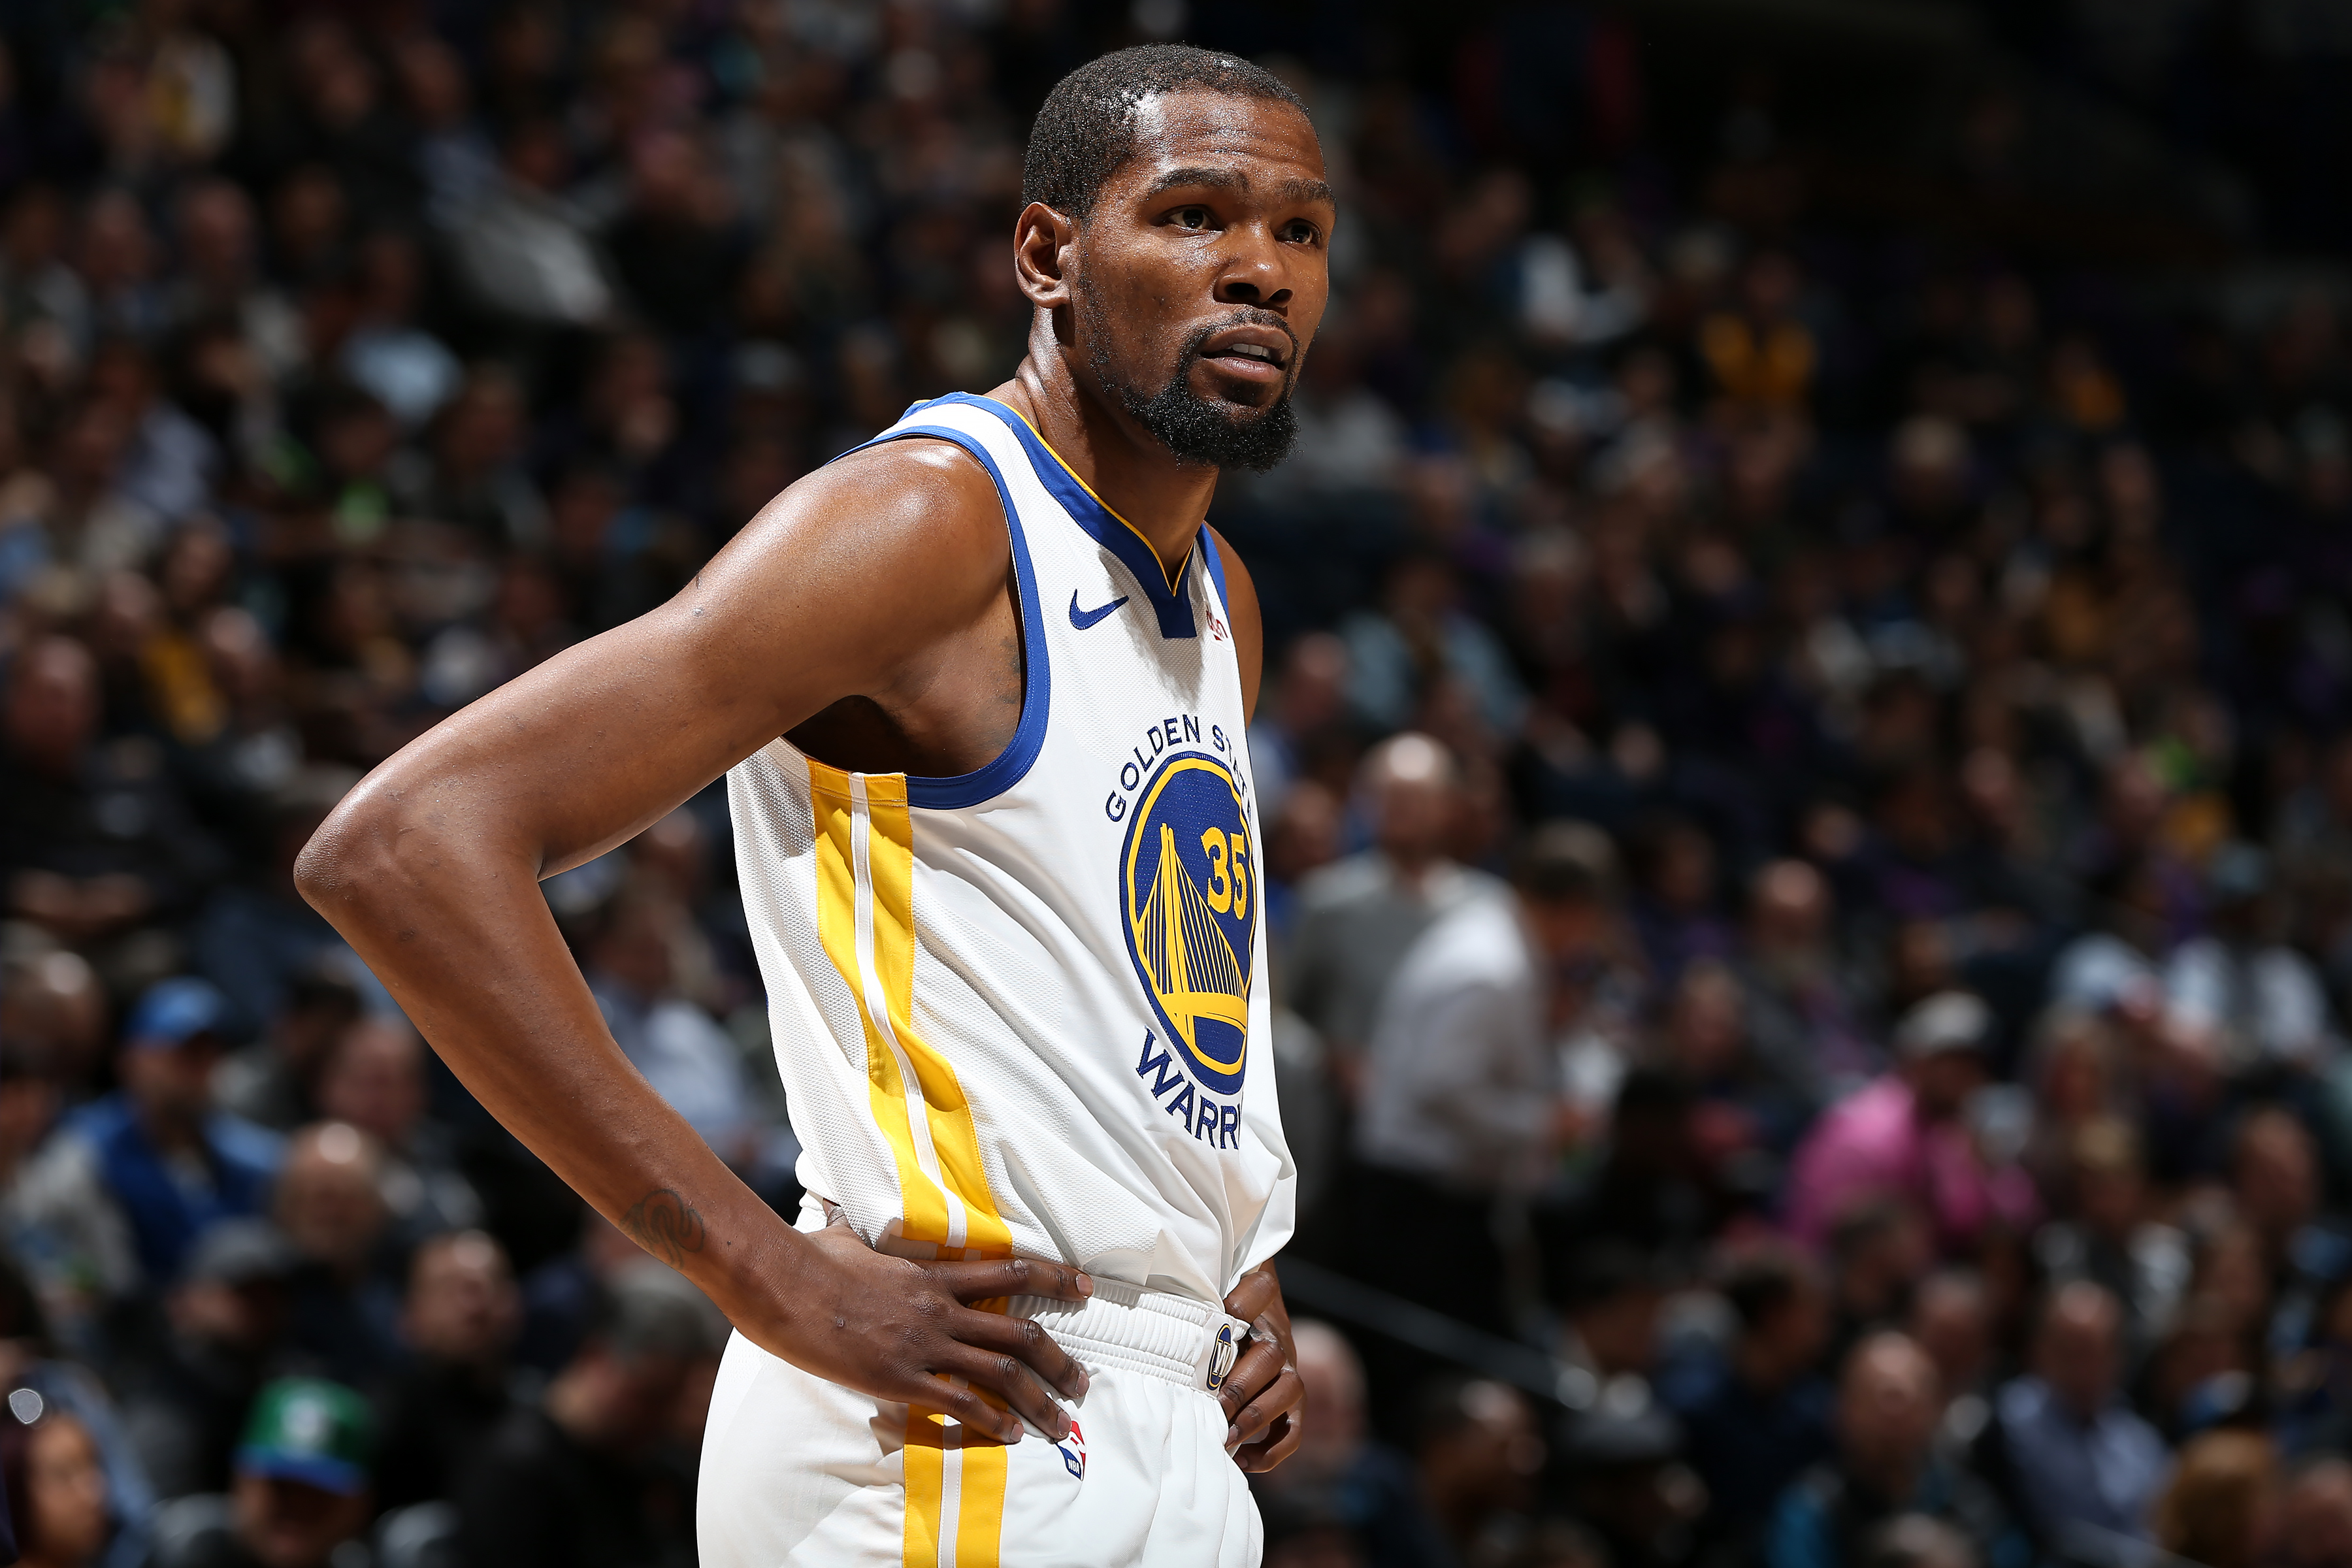 MINNEAPOLIS, MN - MARCH 19: Kevin Durant #35 of the Golden State Warriors looks on against the Minnesota Timberwolves on March 19, 2019 at Target Center in Minneapolis, Minnesota. NOTE TO USER: User expressly acknowledges and agrees that, by downloading and or using this Photograph, user is consenting to the terms and conditions of the Getty Images License Agreement. Mandatory Copyright Notice: Copyright 2019 NBAE (Photo by David Sherman/NBAE via Getty Images) (David Sherman—NBAE/Getty Images)